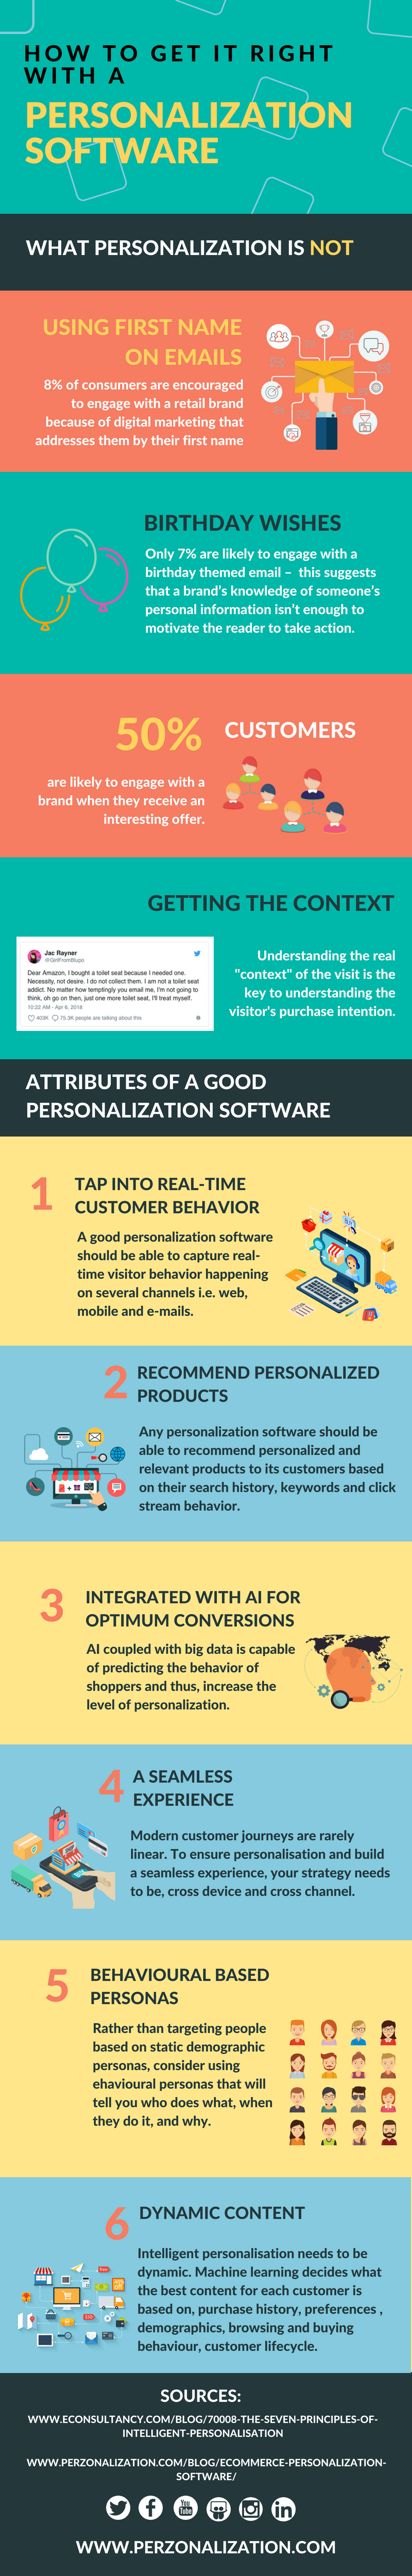 What a personalization software is and what it is not. Find out tips and tricks on how to make it right with an eCommerce personalization software. All on this infographic.